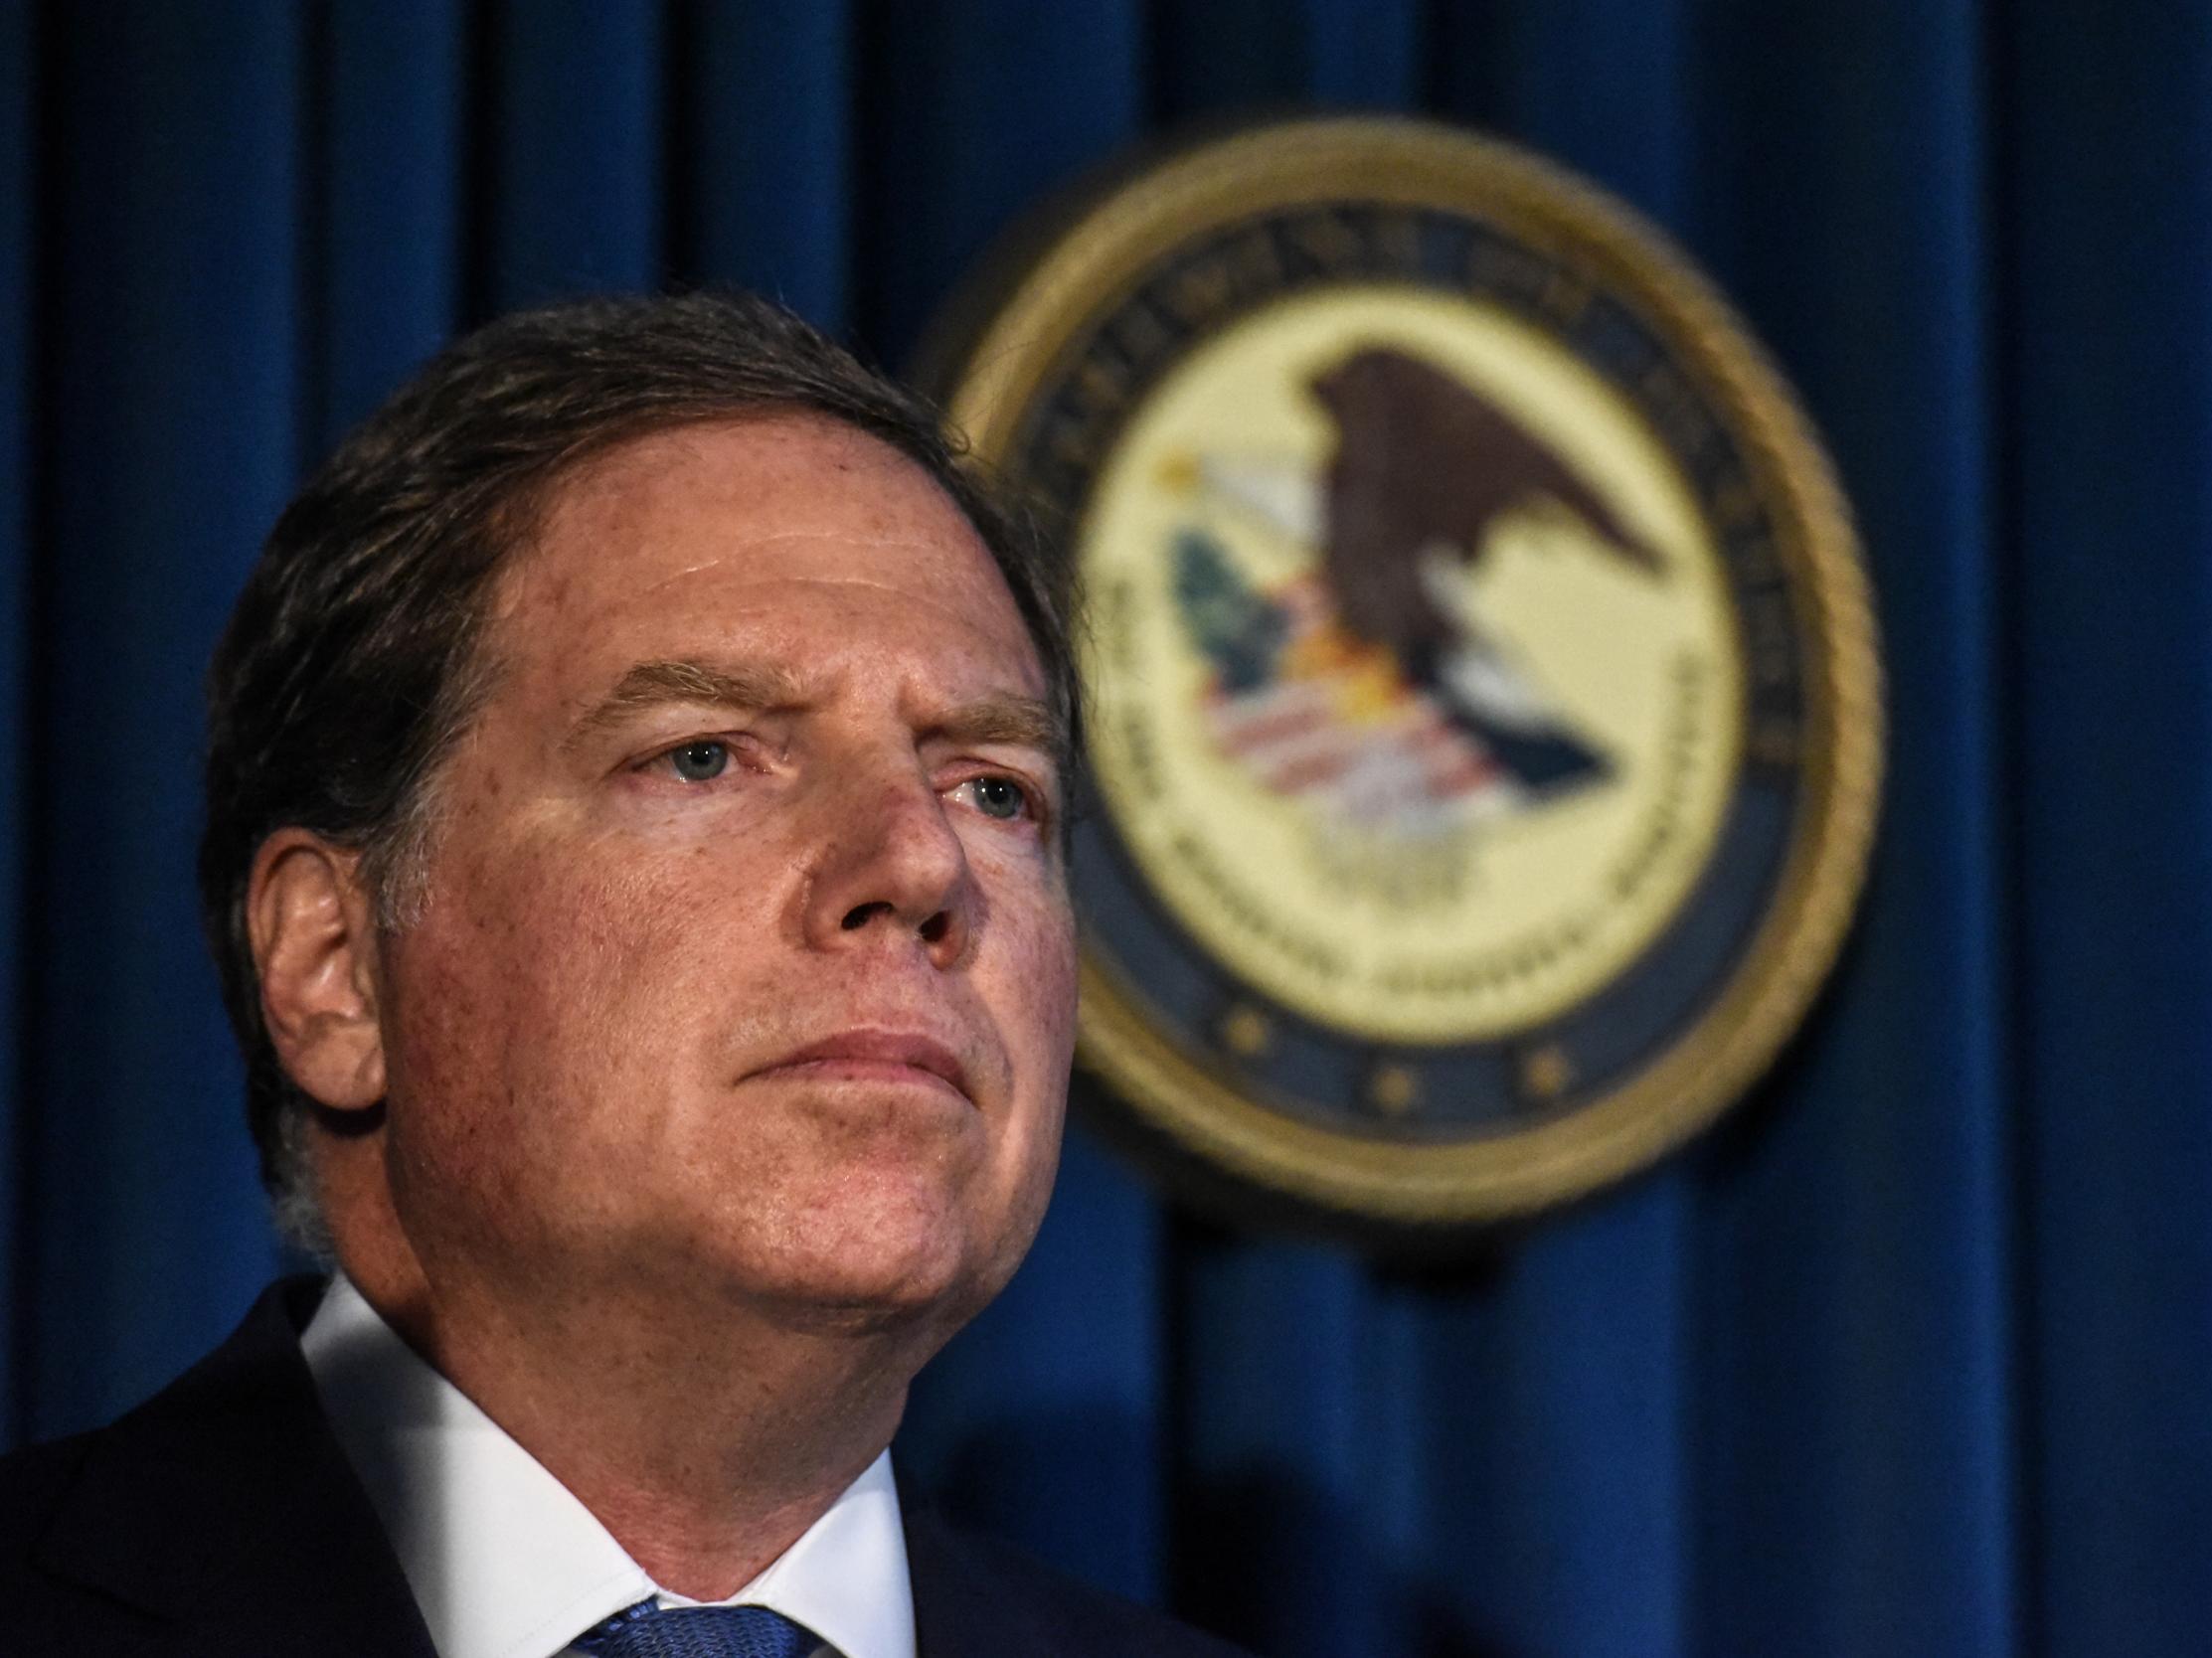 Geoffrey Berman will not leave his post until there is a Senate-confirmed replacement